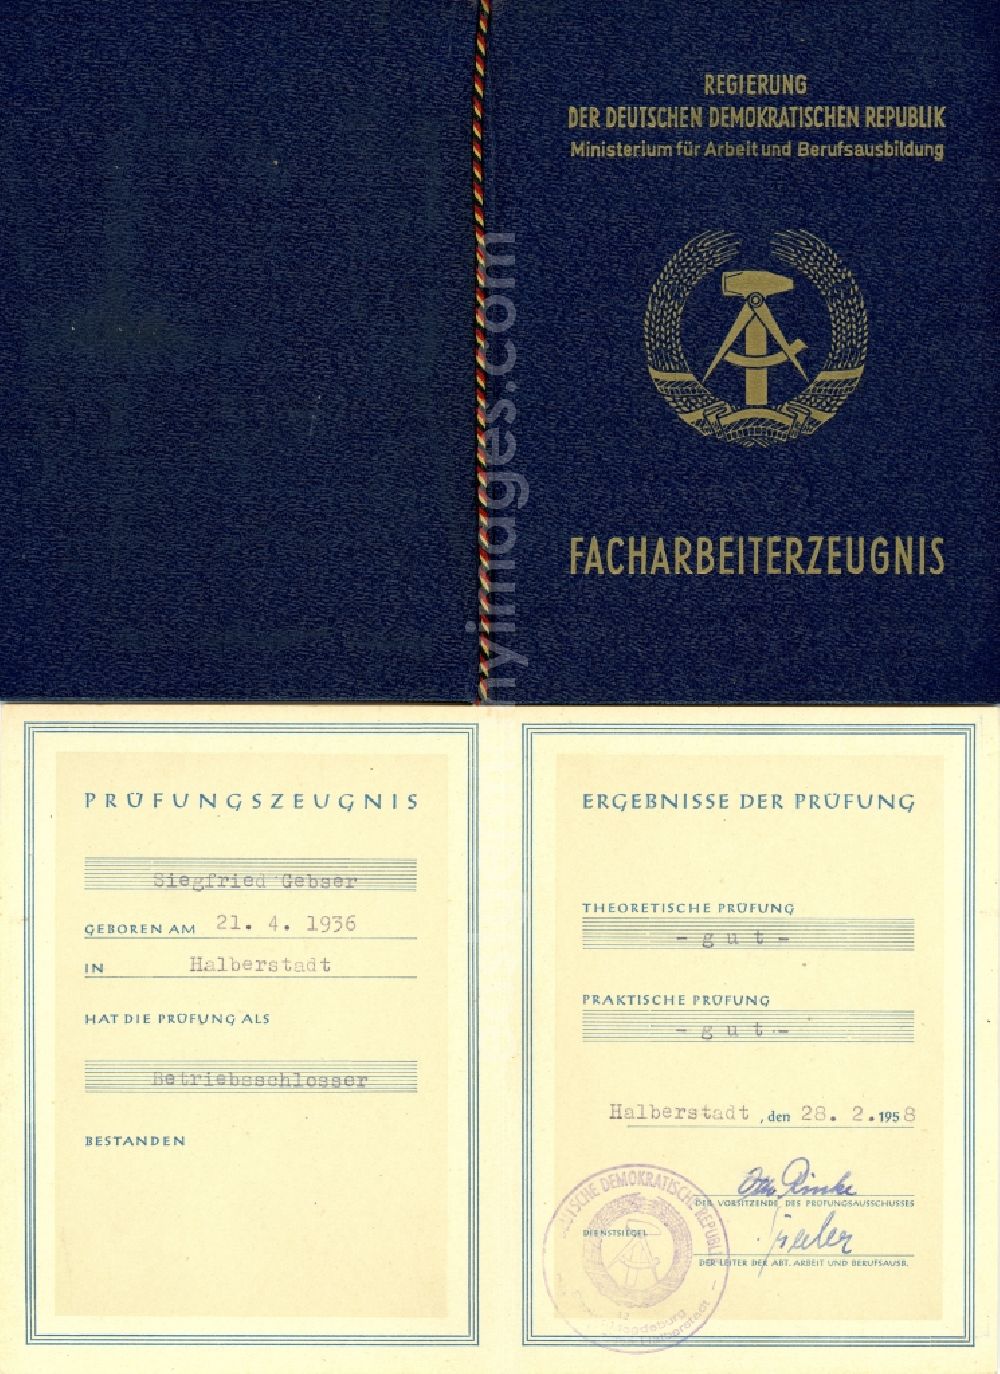 GDR image archive: Halberstadt - Reproduction Facharbeiterzeugnis Betriebsschlosser issued in Halberstadt in the state Saxony-Anhalt on the territory of the former GDR, German Democratic Republic